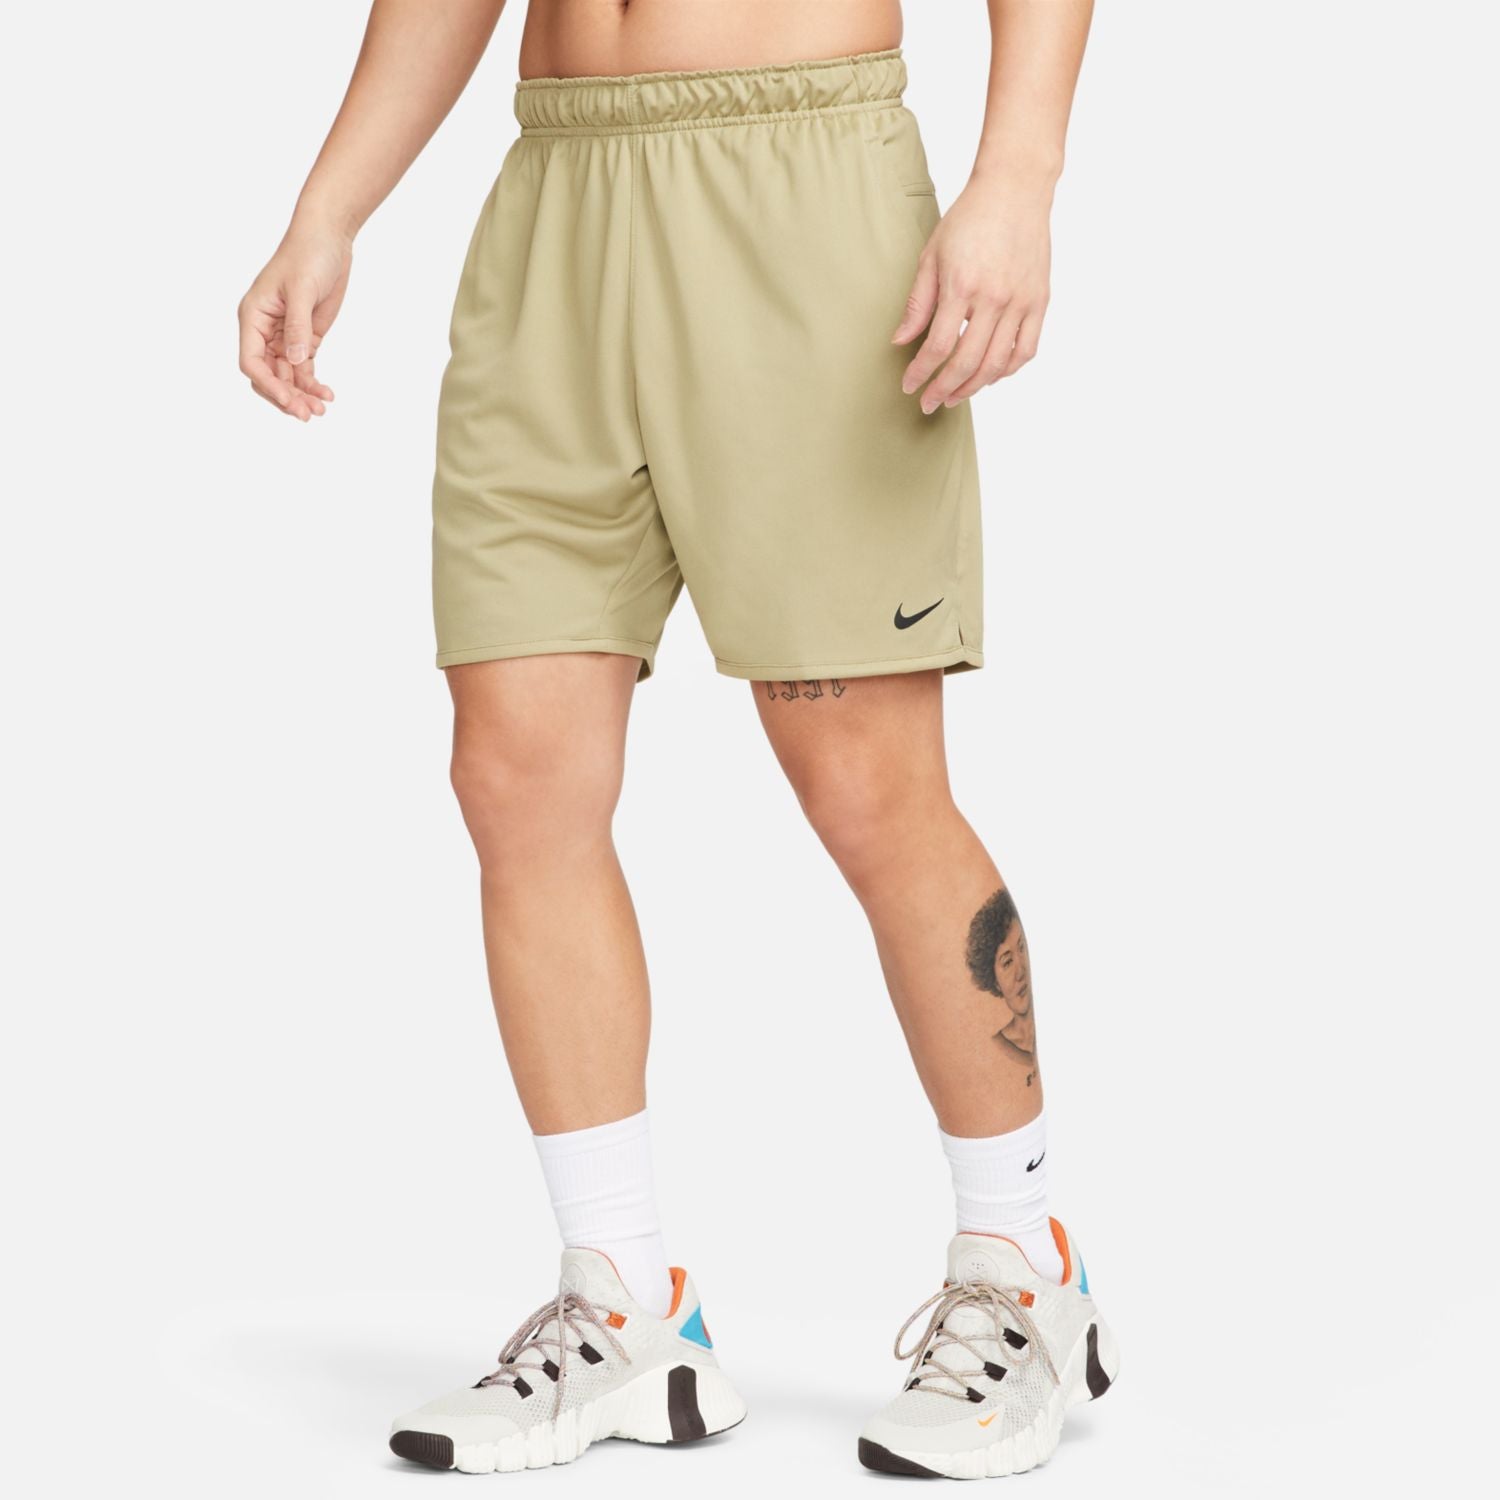 NIKE AS MDF TOTALTY KNT 7IN UL FB4197-276 SHORT TRAINING (M)